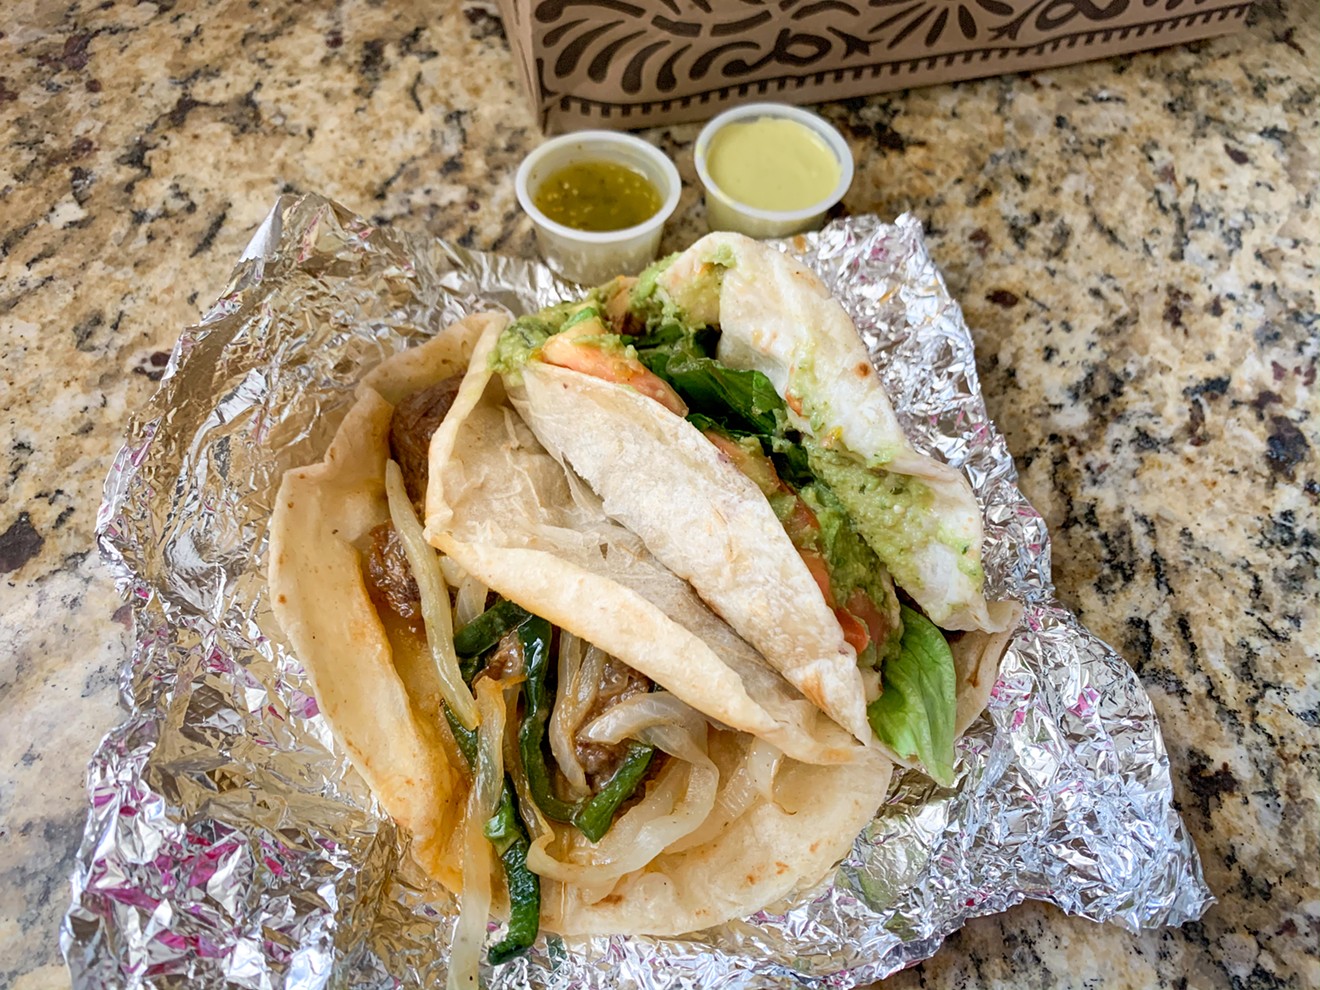 The Frontera fundido sirloin and Heather tacos from Tacodeli in Dallas — looking less pretty after transport than they would in the restaurant normally.